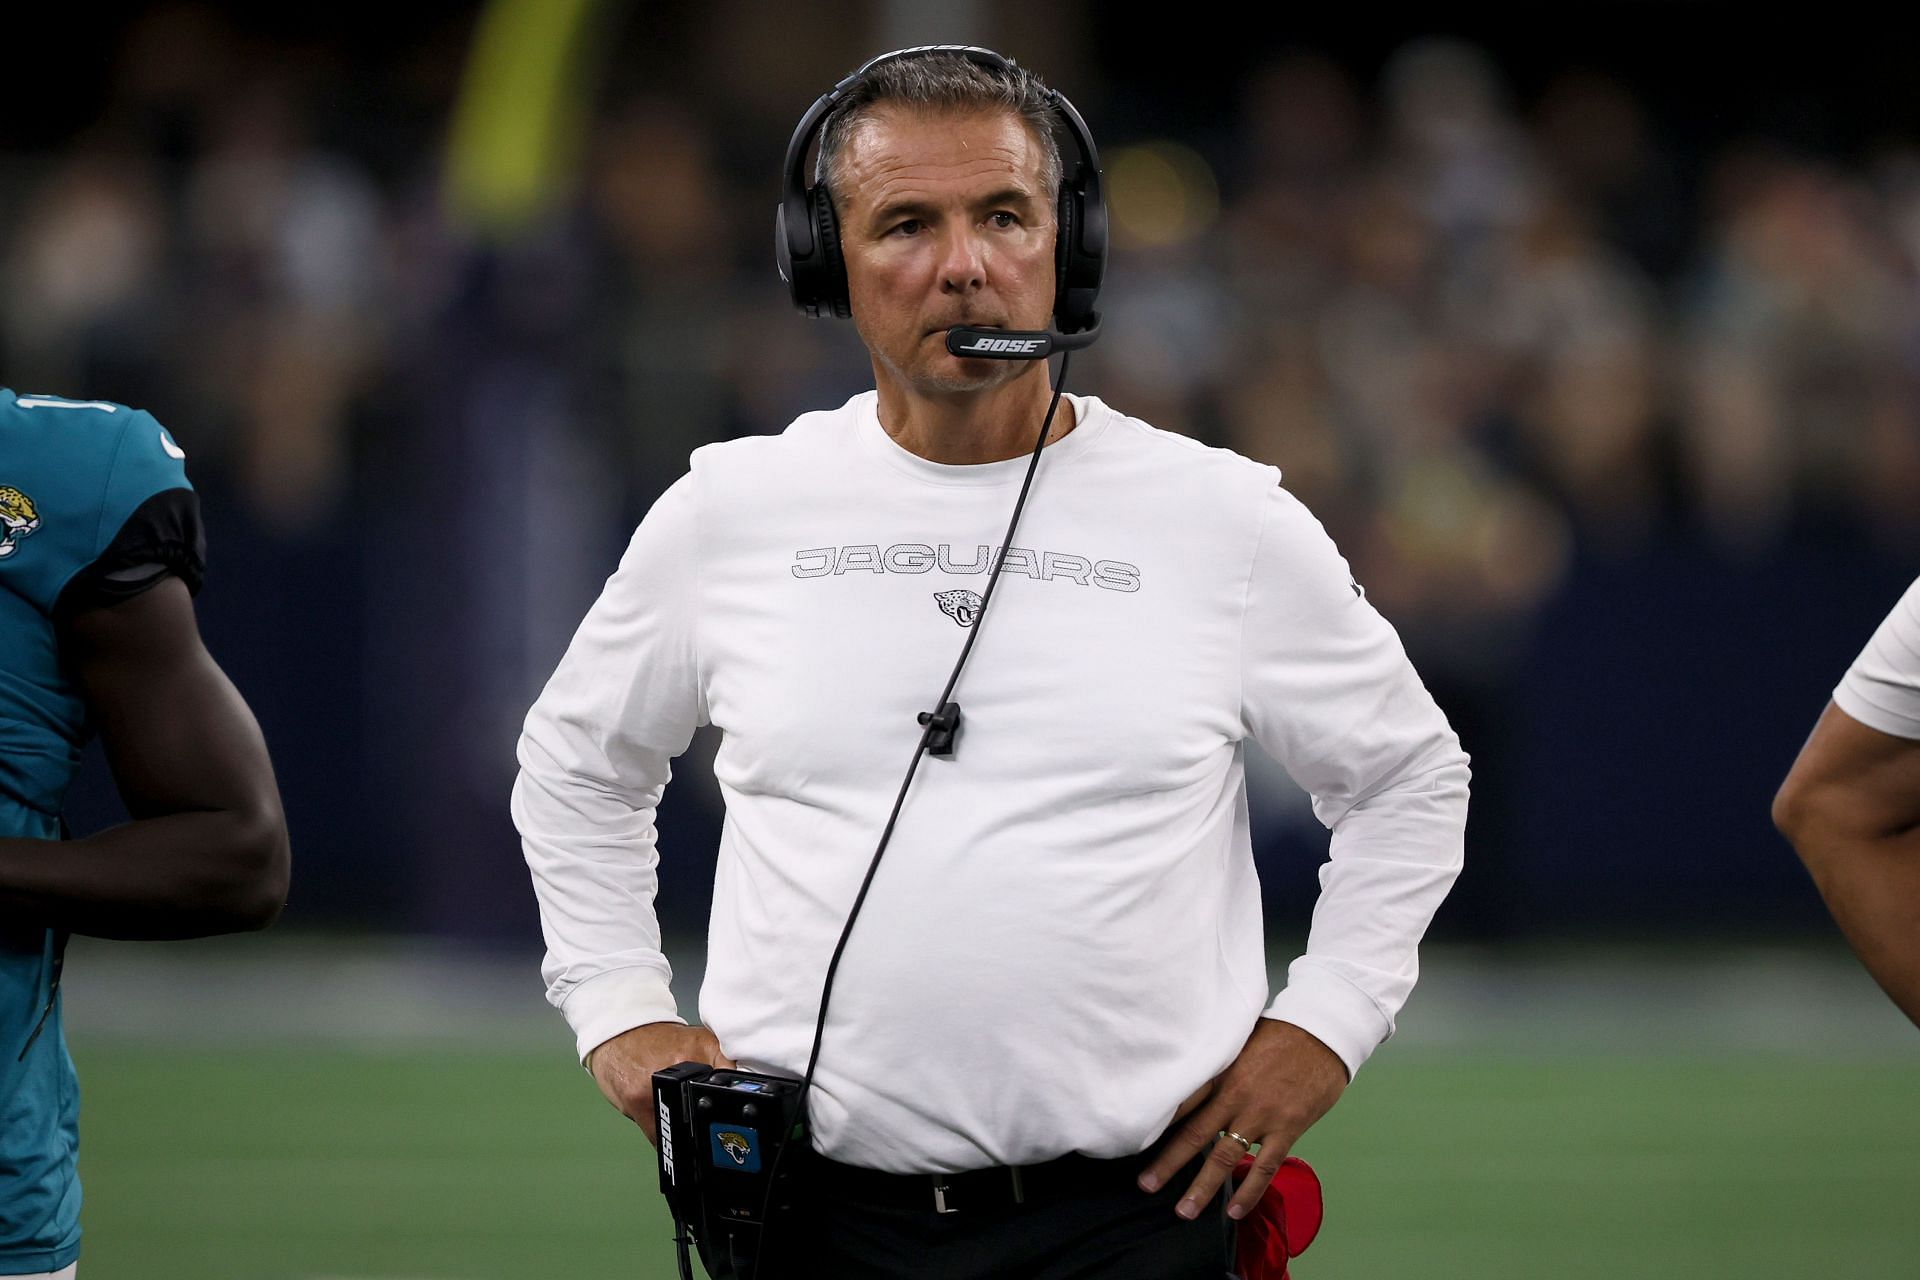 Meyer during the August preseason game in Dallas, where the alleged kicking incident took place (Photo: Getty)